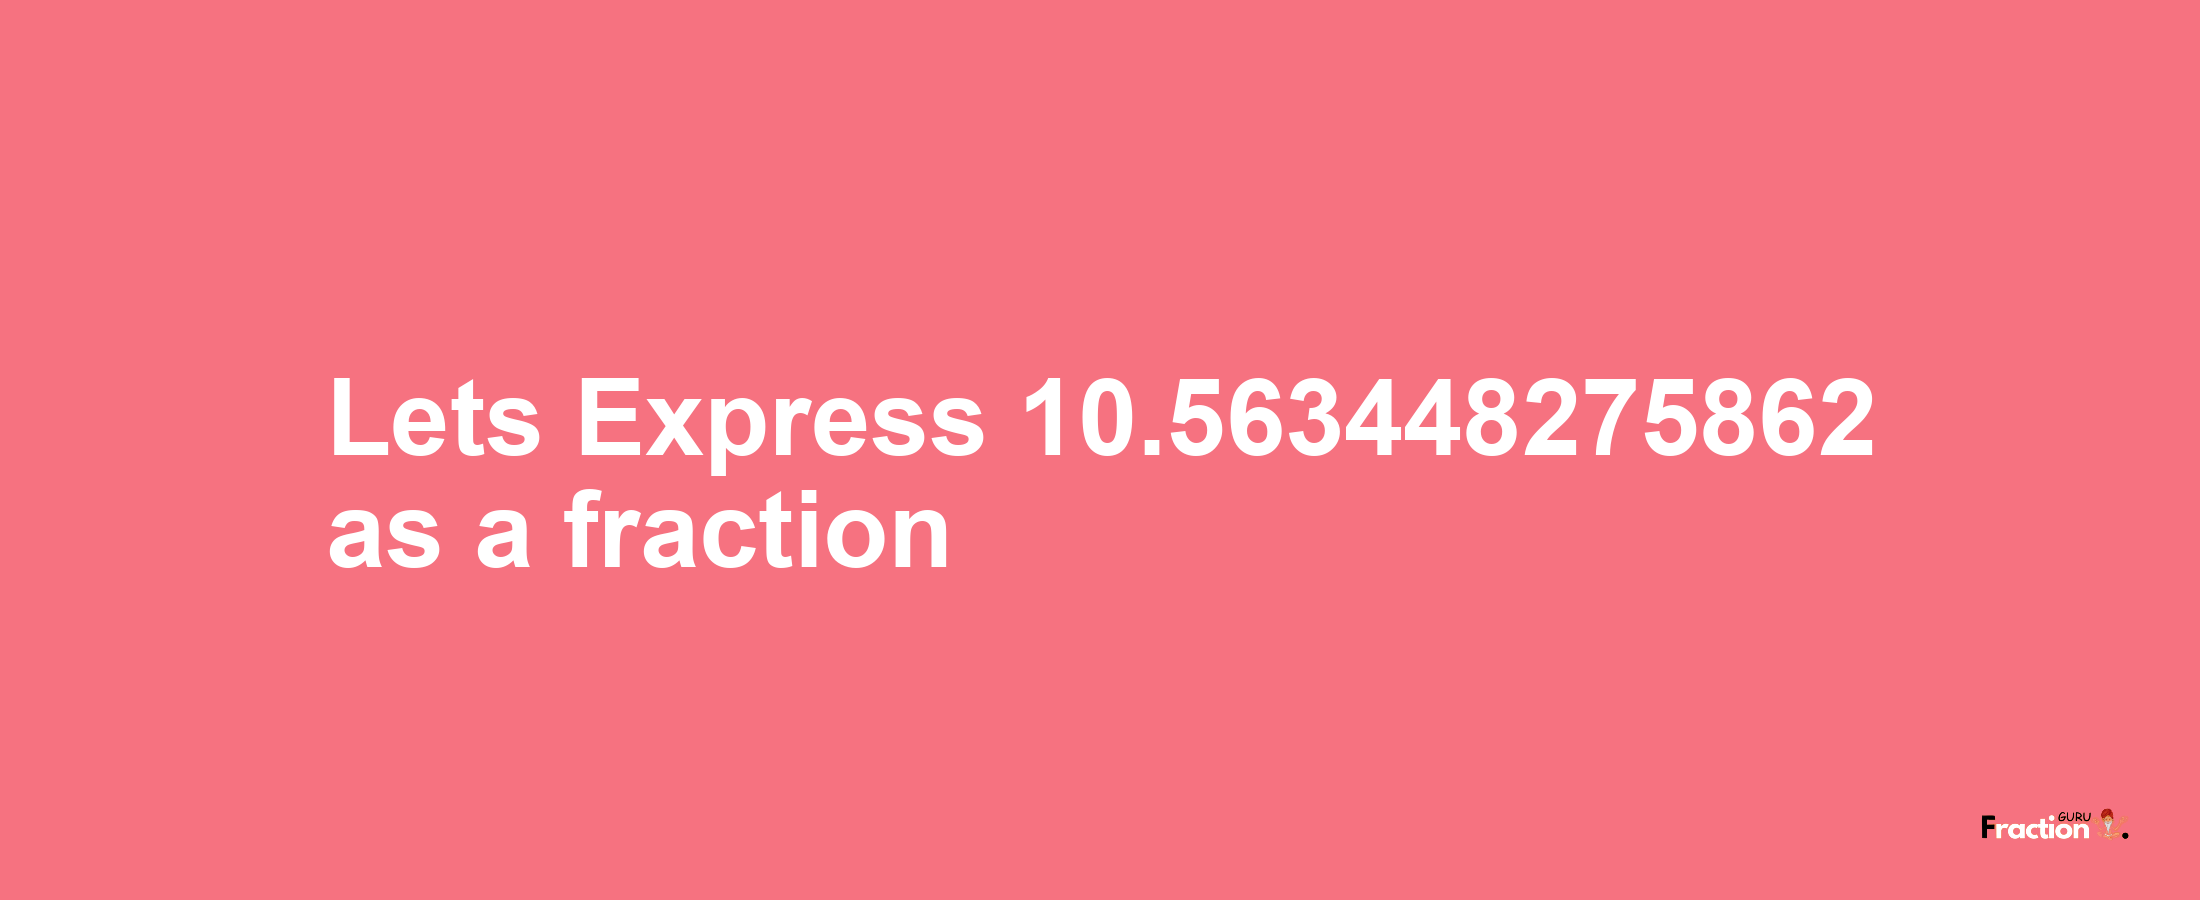 Lets Express 10.563448275862 as afraction